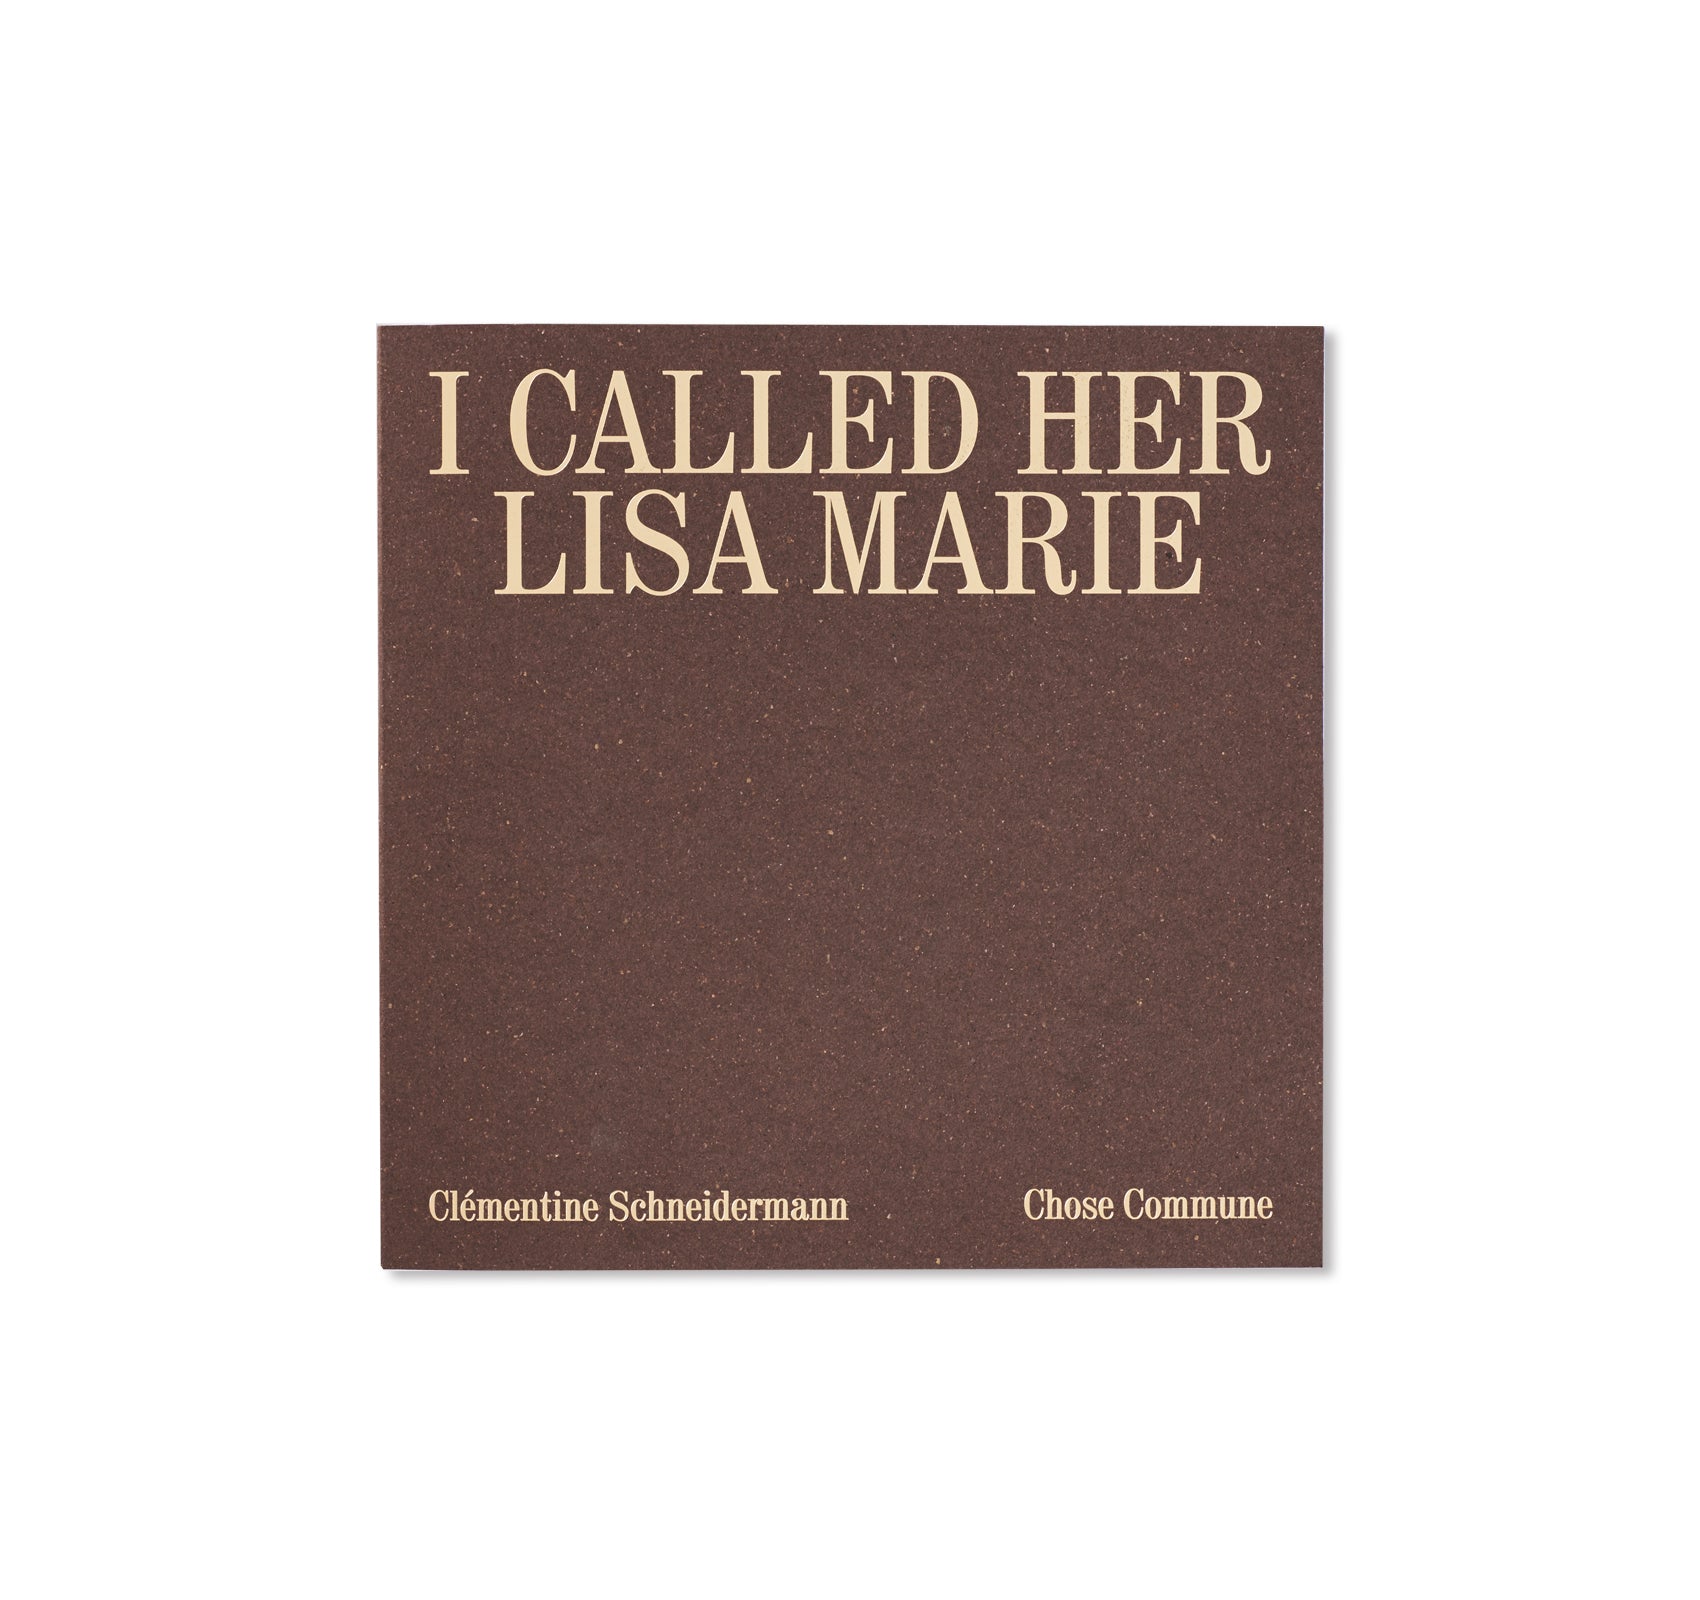 I CALLED HER LISA-MARIE by Clémentine Schneidermann [SIGNED]